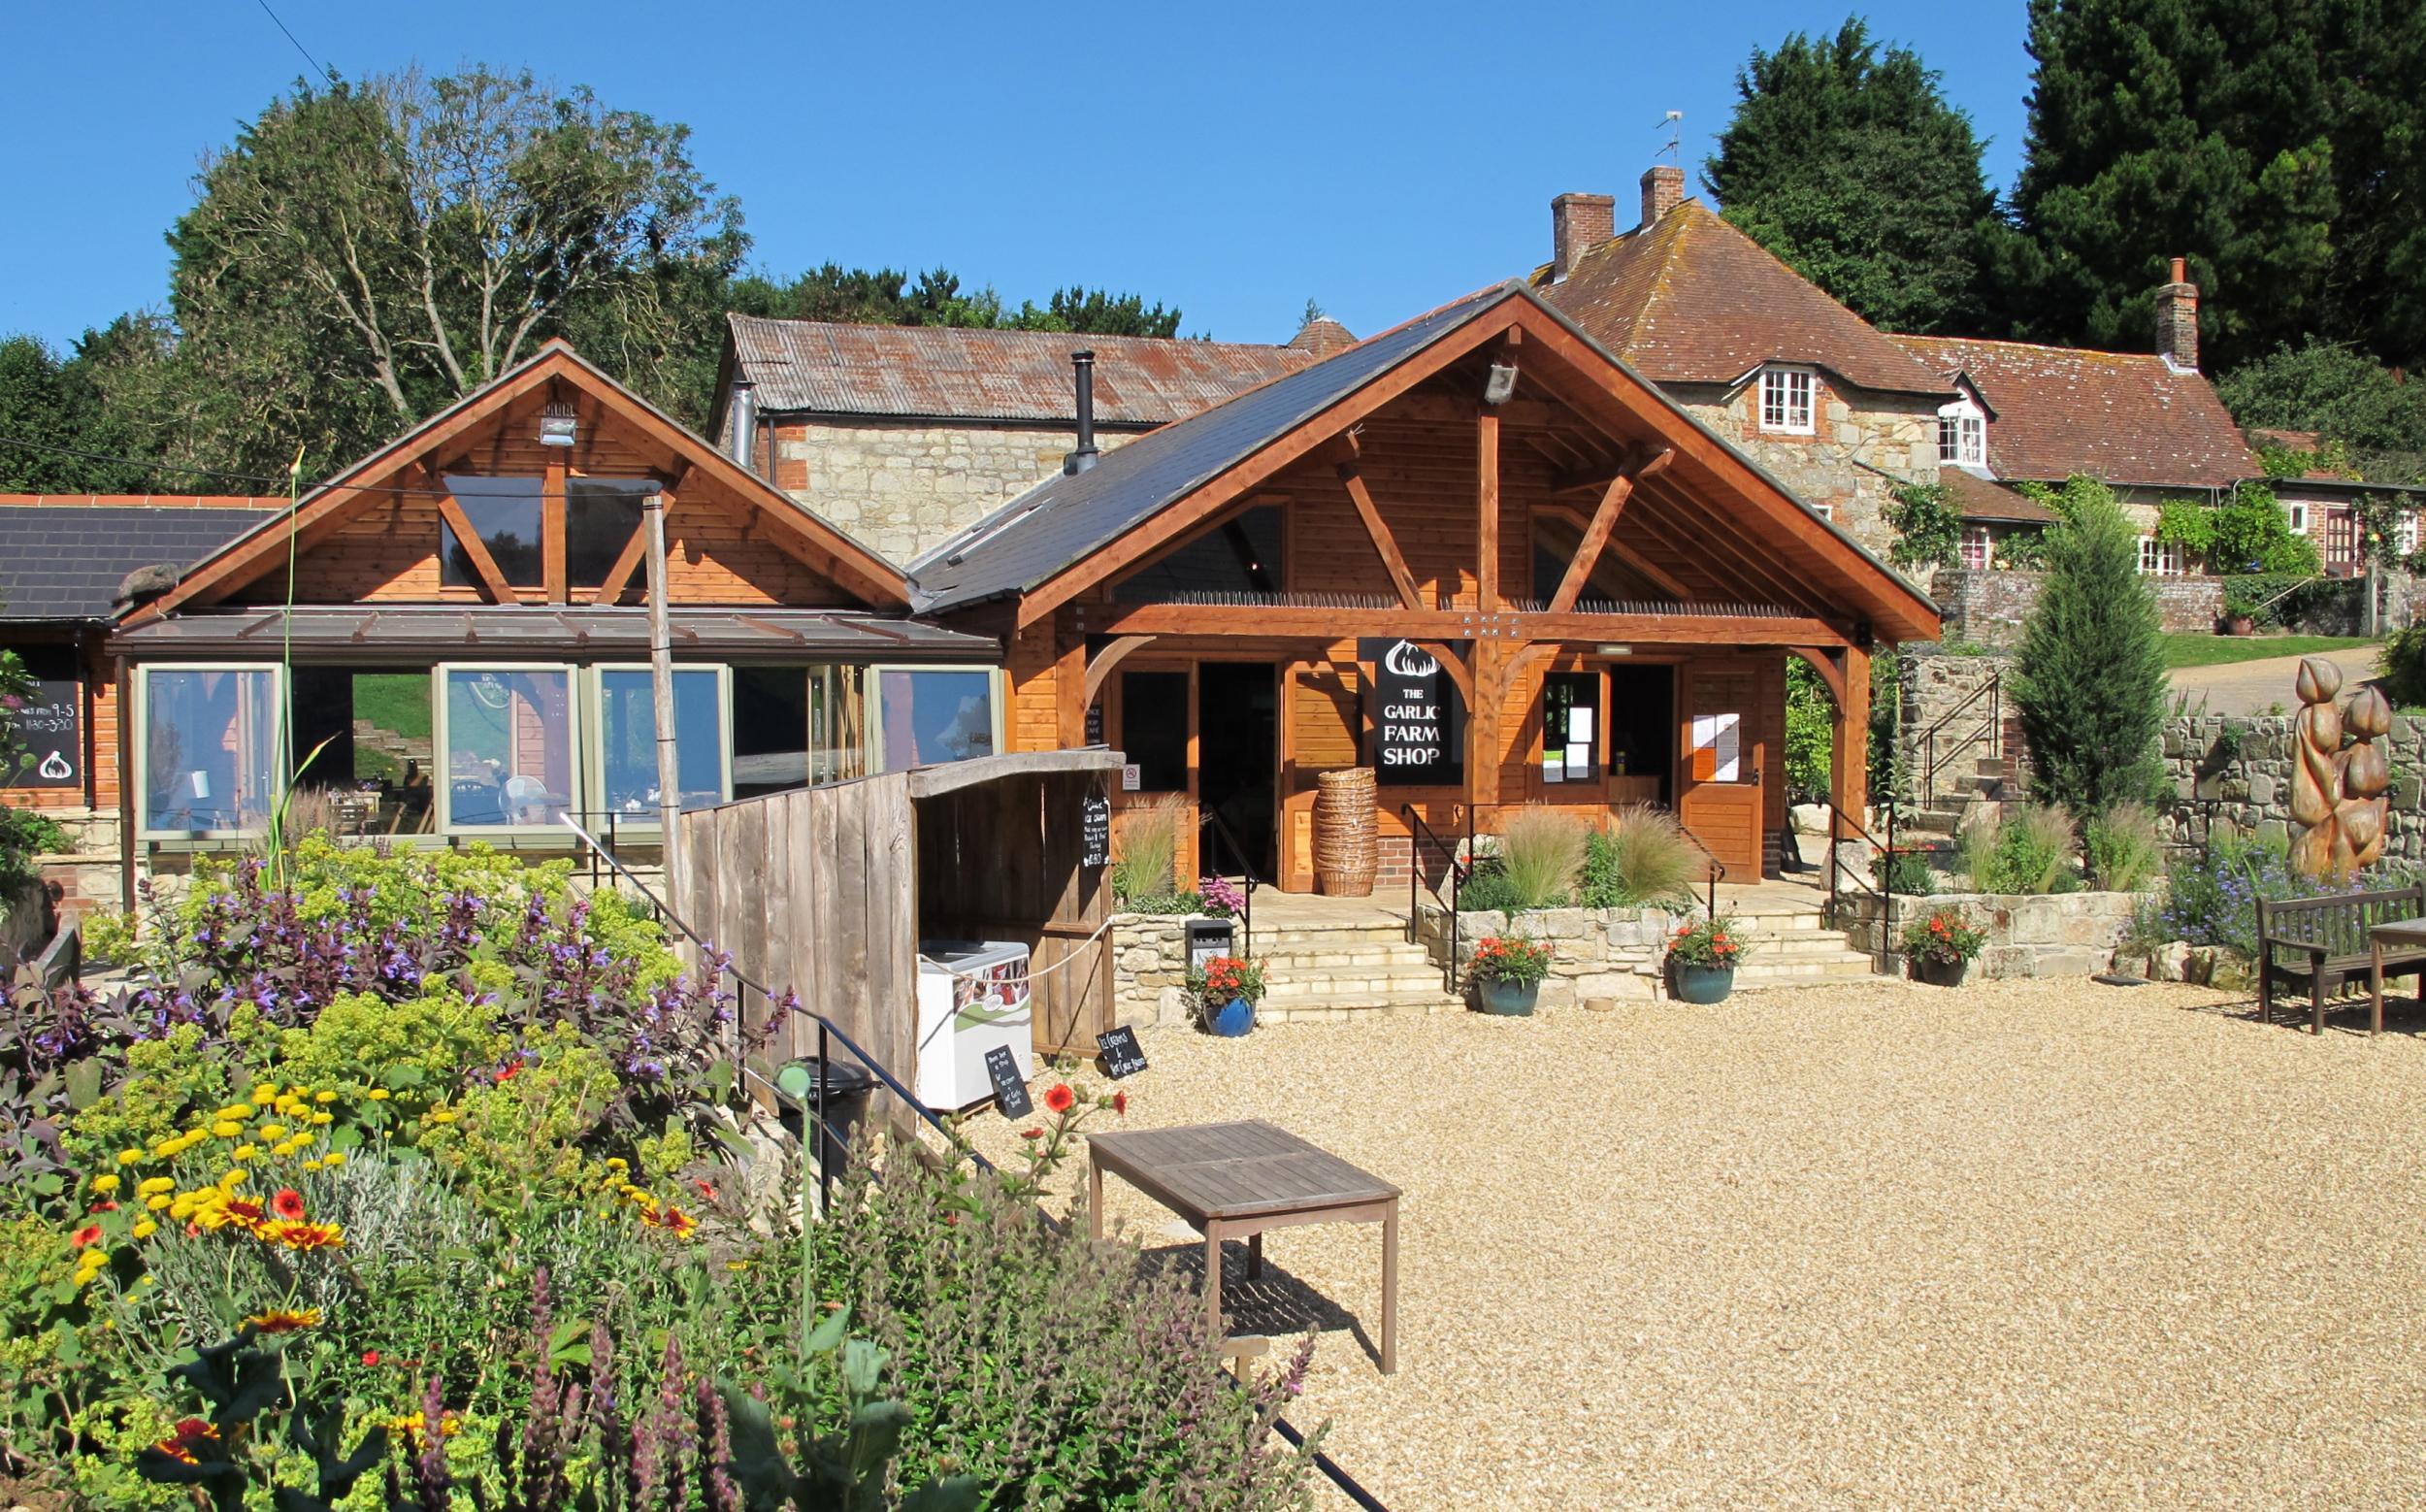 Head south and indulge in cookery and crafts at the Garlic Farm